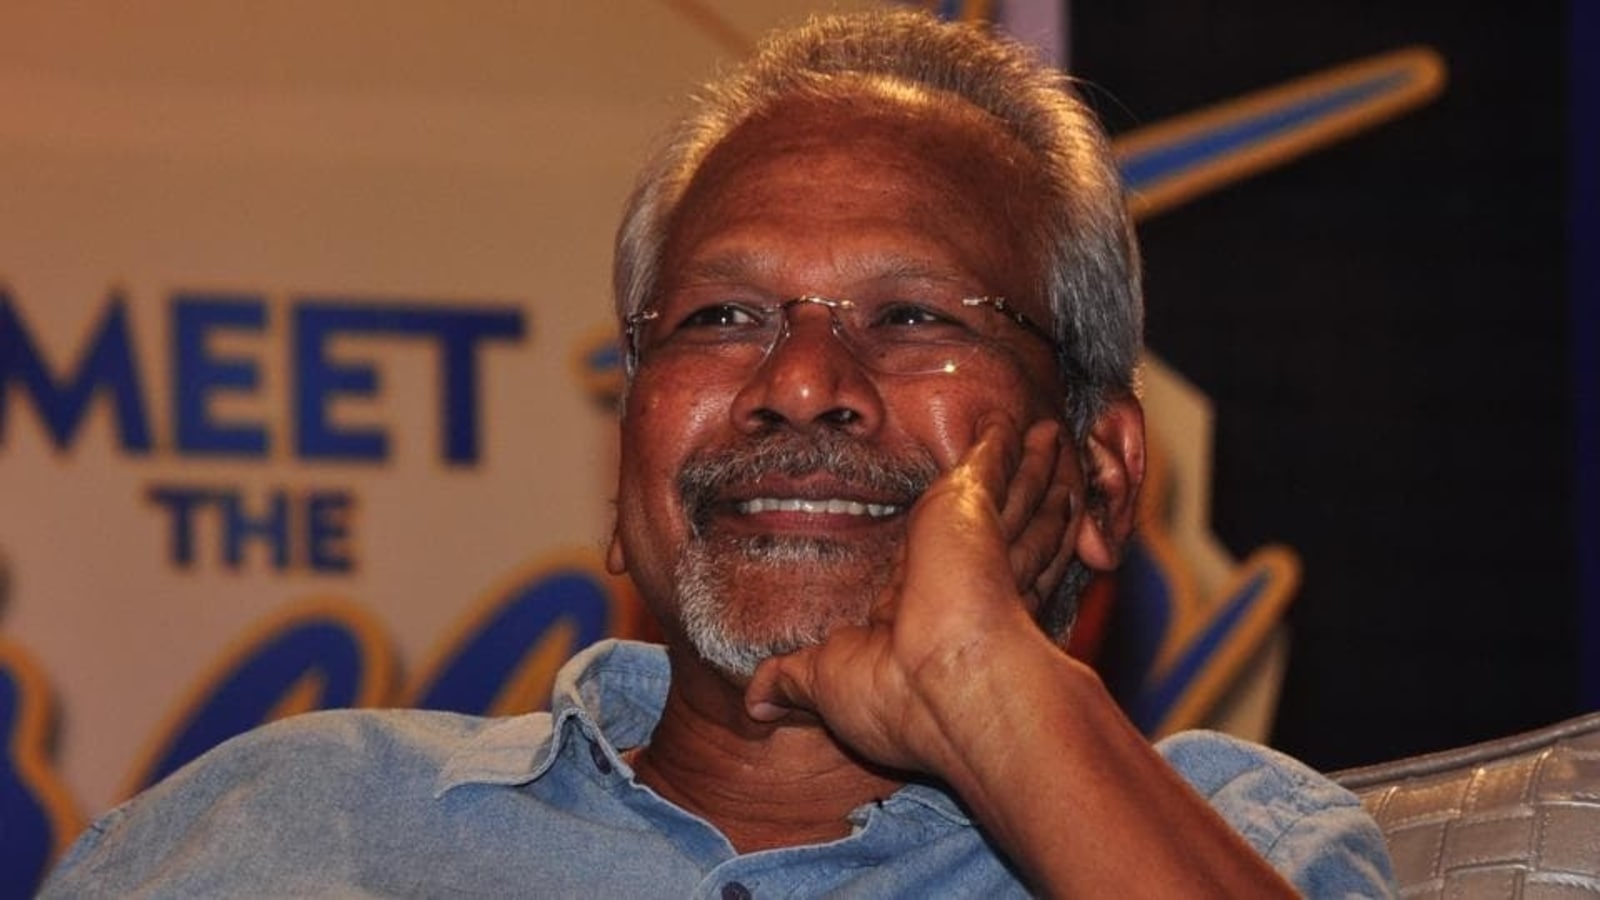 Mani Ratnam says he is ‘glad’ he was unable to make Ponniyin Selvan earlier: ‘Today, audiences are open to…’